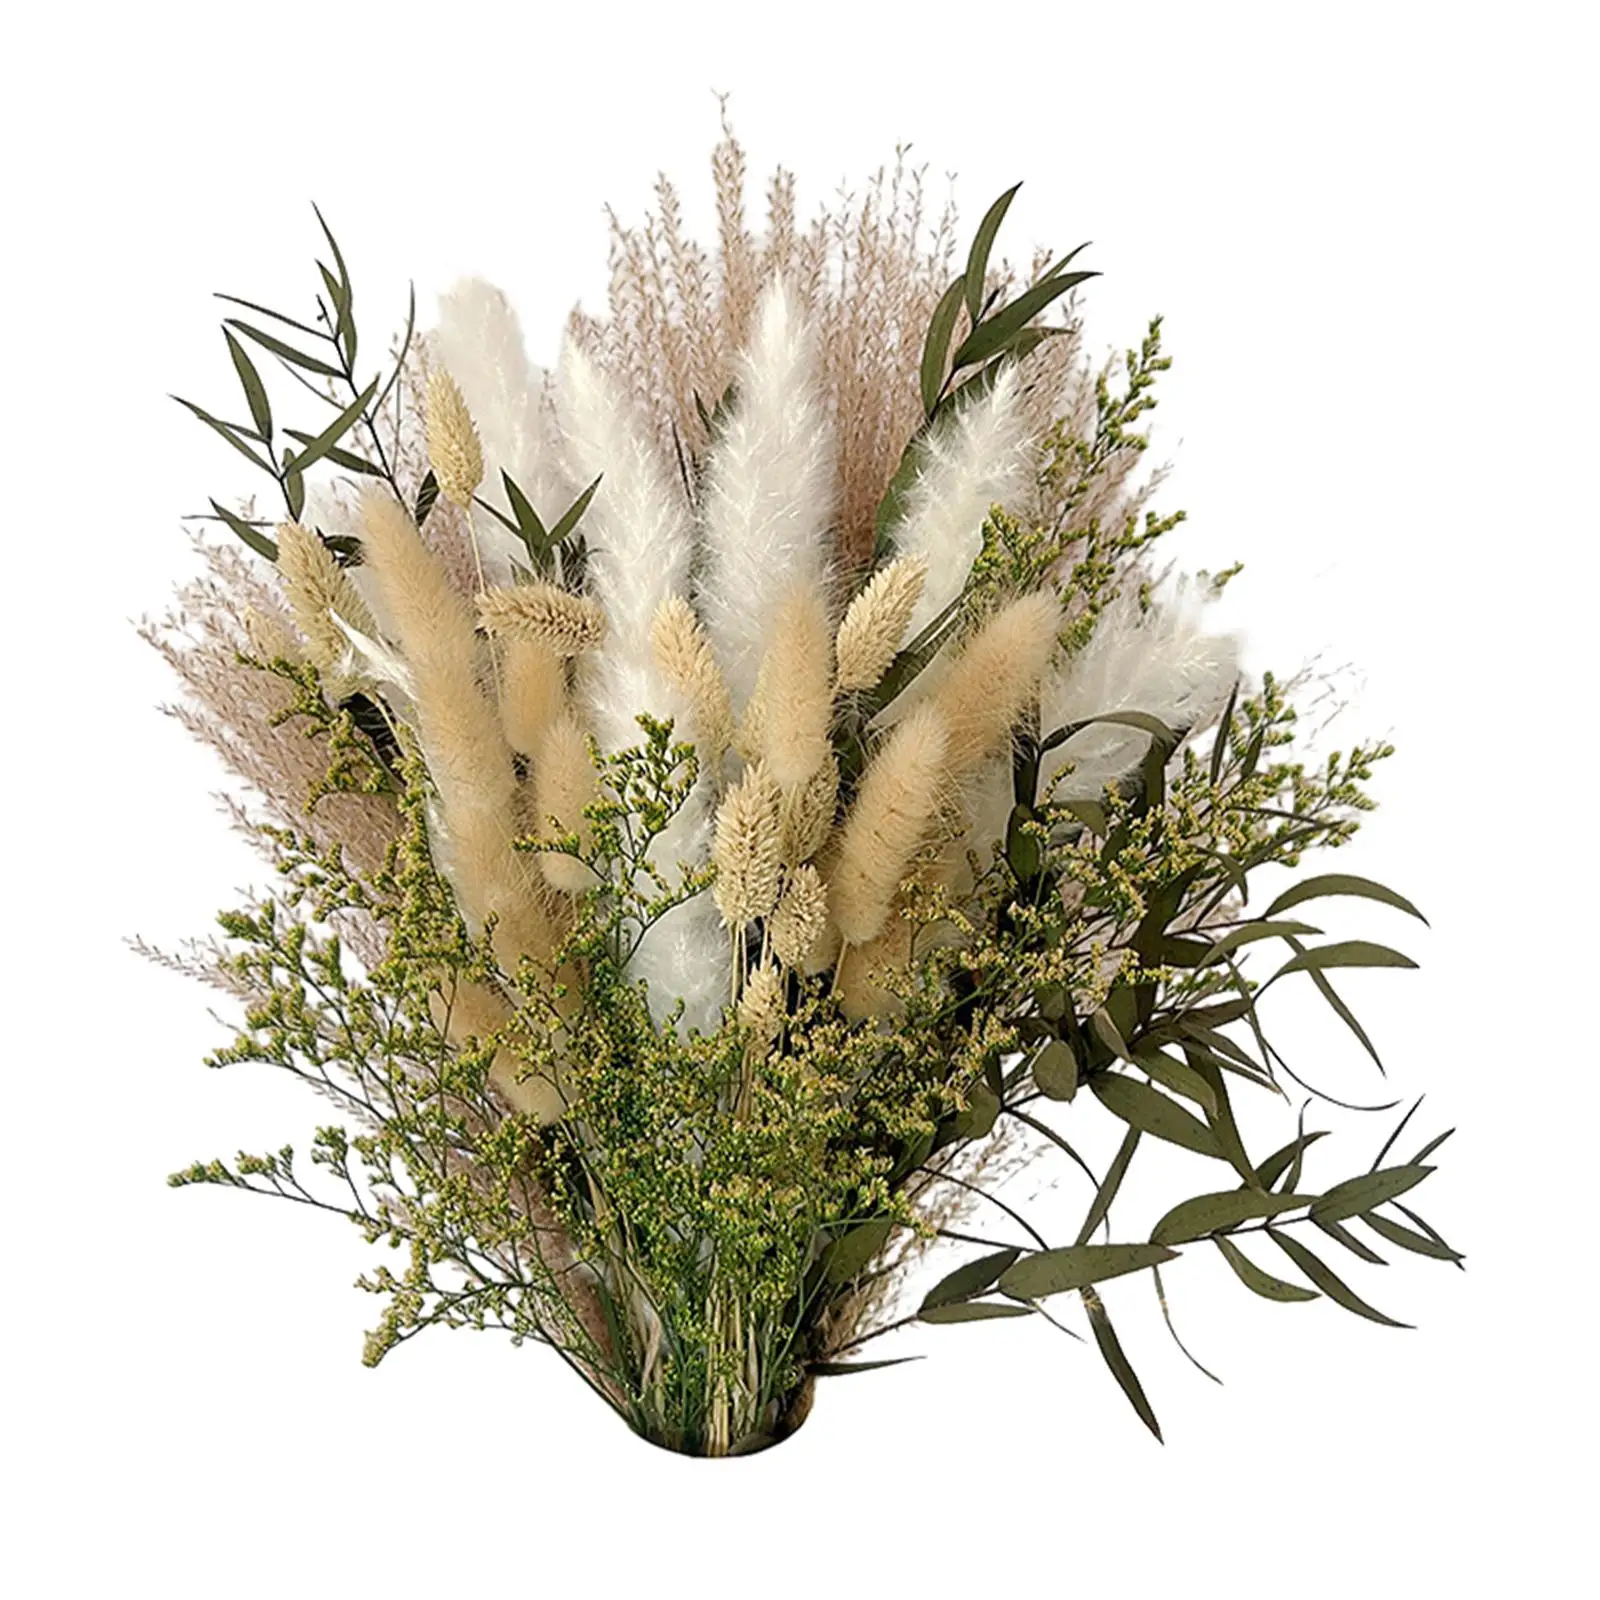 Natural Dried Flower Decorative Dry Flowers for Table Centerpiece Home Dorm